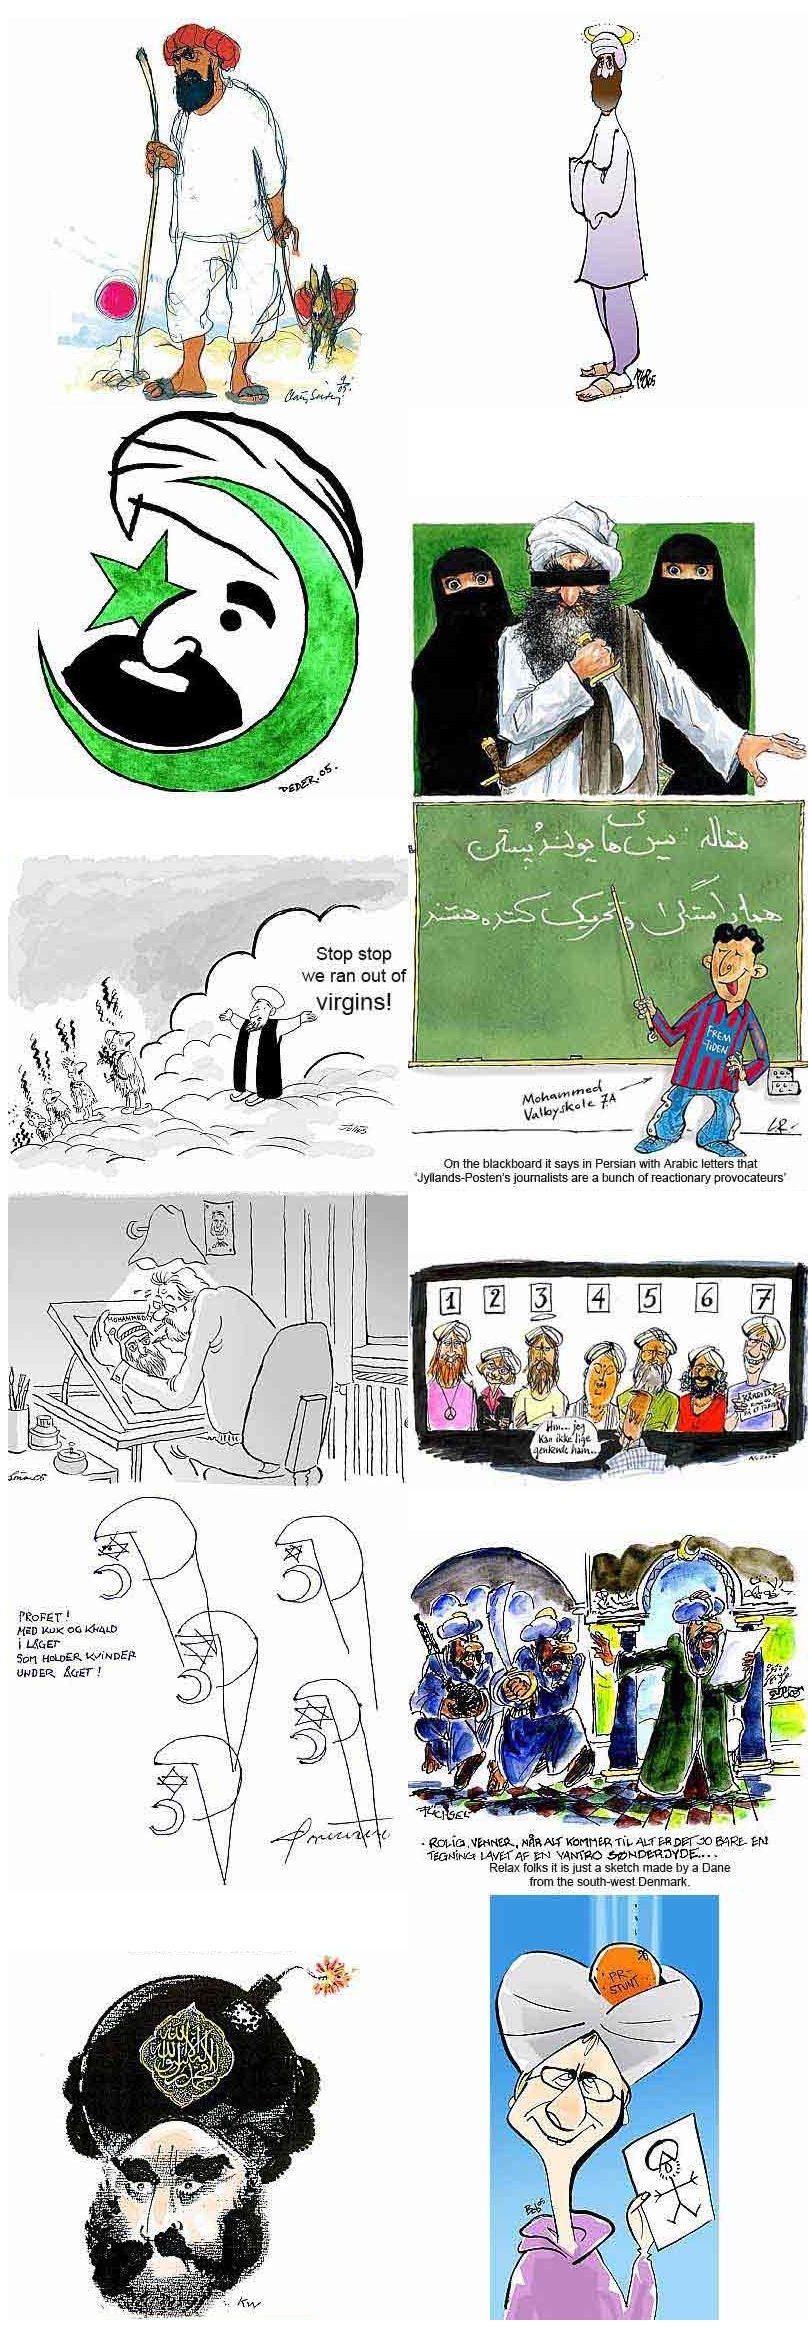 The Jyllands-Posten Muhammad cartoons controversy (or Muhammad cartoons crisis) began after 12 editorial cartoons, most of which depicted the Islamic prophet Muhammad, were published in the Danish newspaper Jyllands-Posten on 30 September 2005